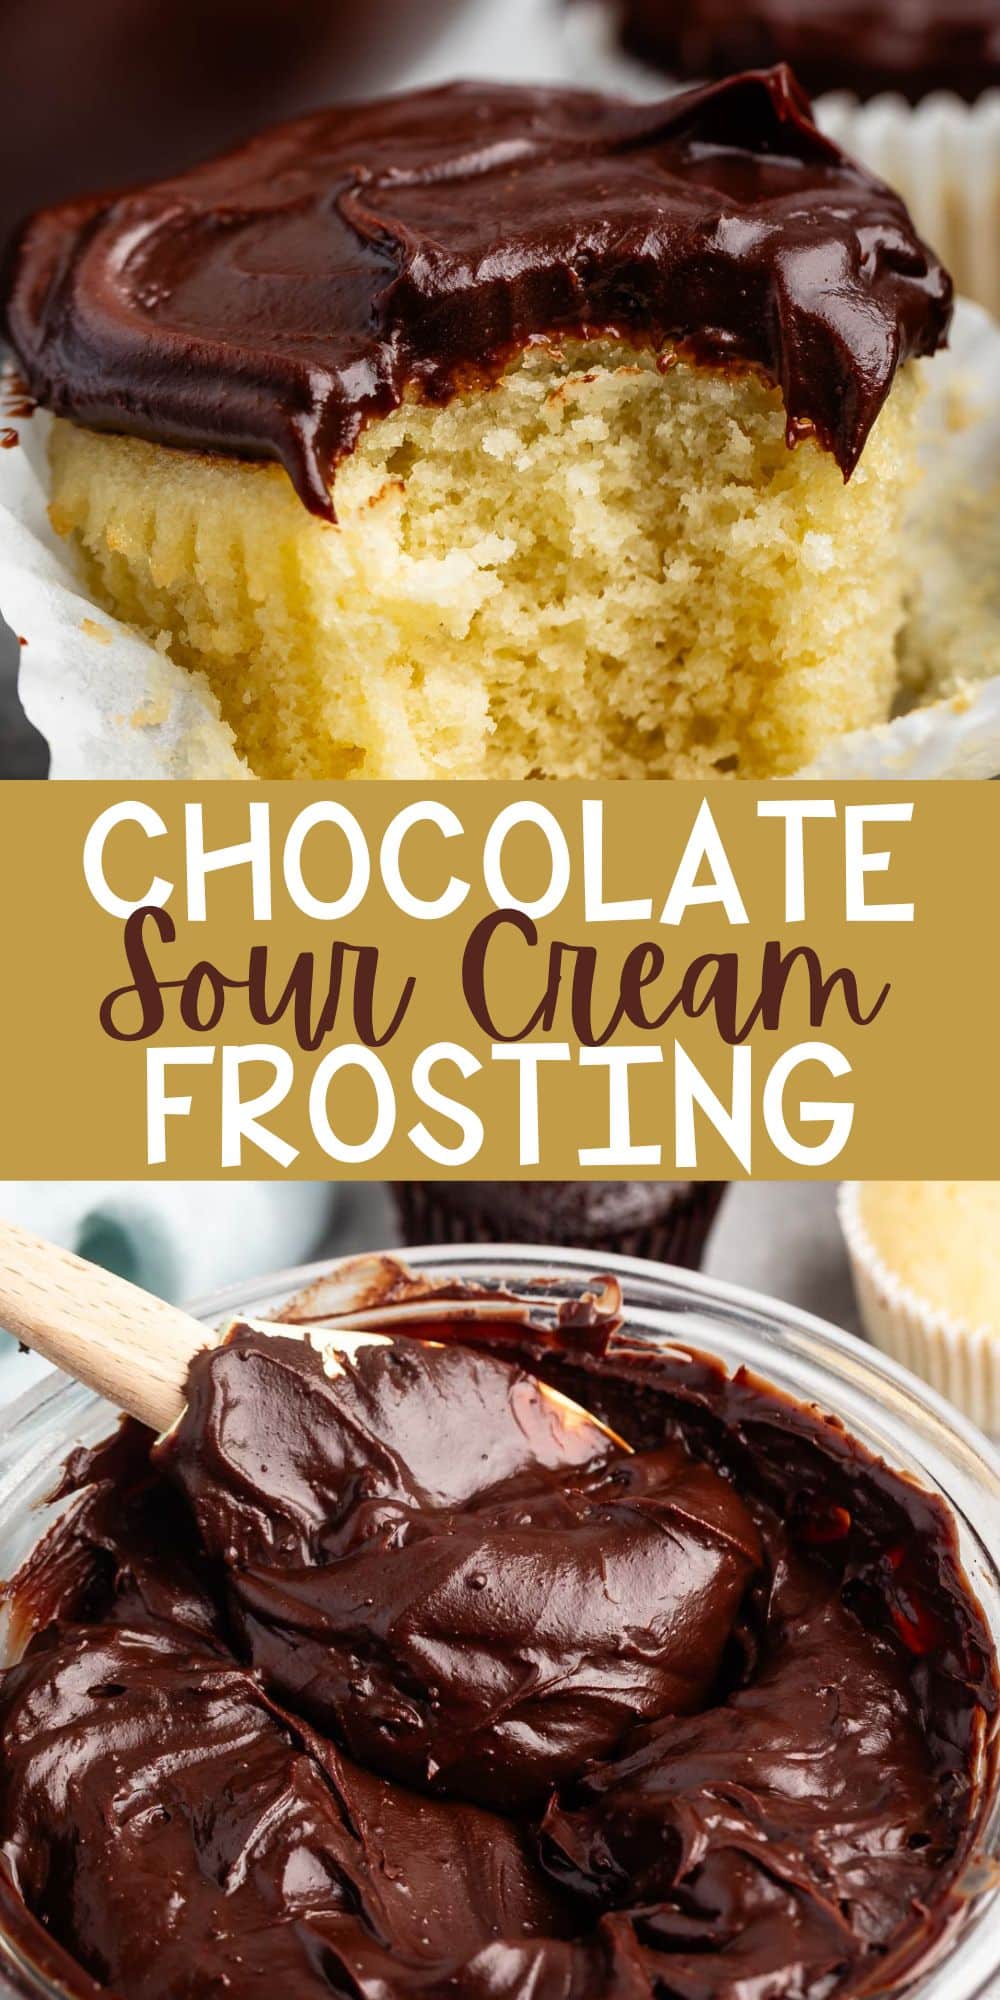 two photos of yellow cupcakes topped with chocolate sour cream frosting with words on the image.